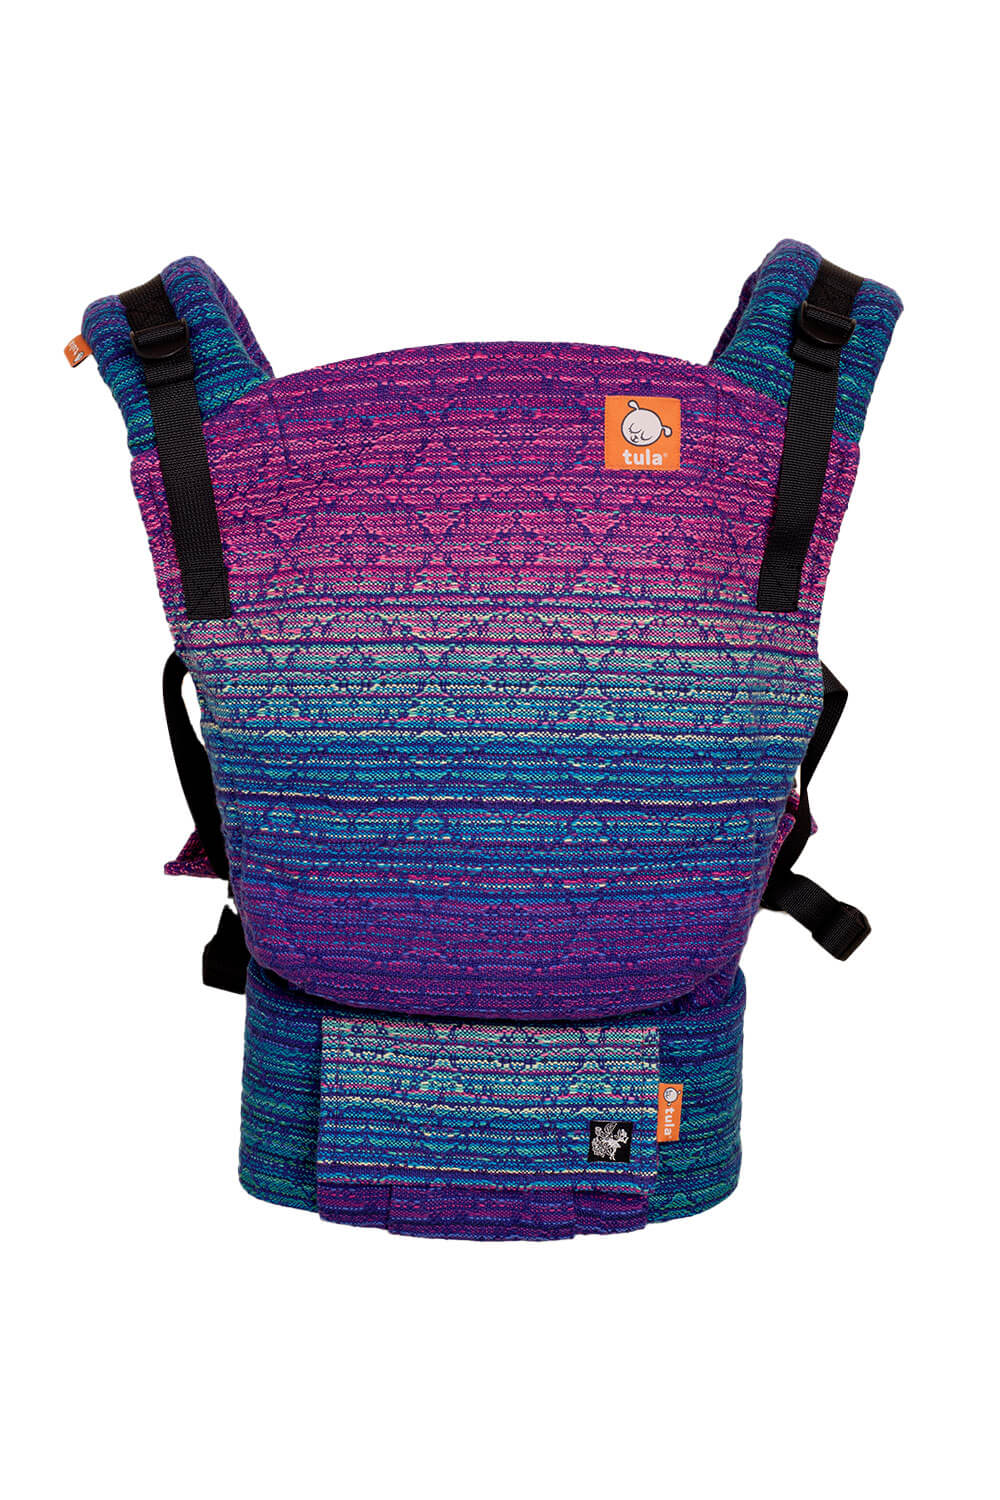 Dreamer - Signature Woven Free-to-Grow Baby Carrier